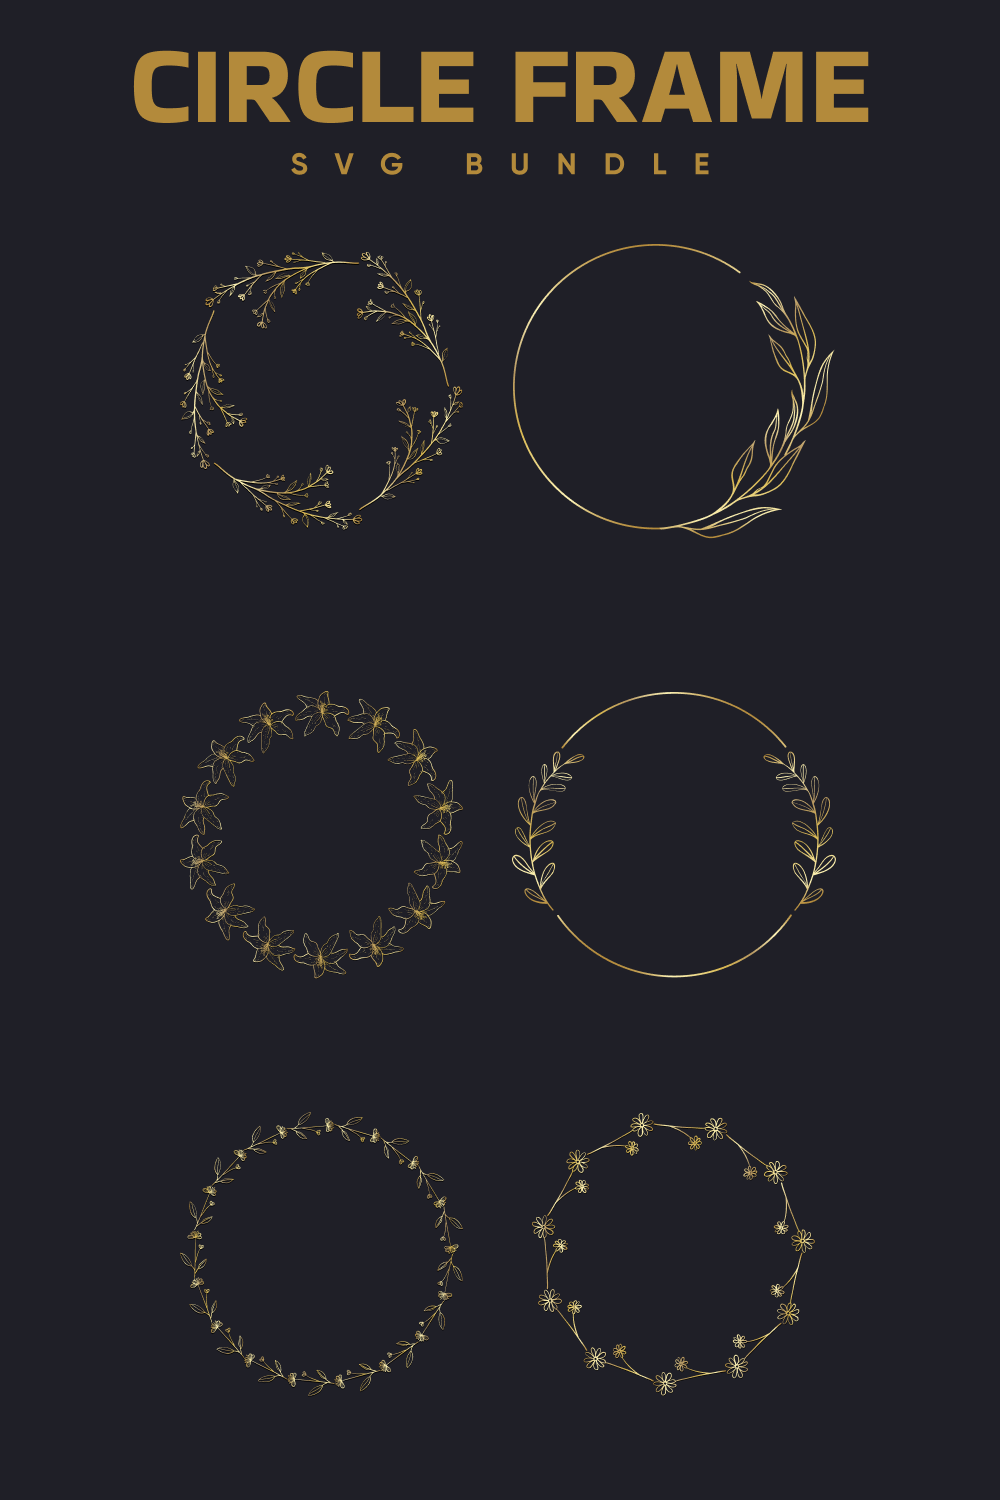 Circle frames on the black background.